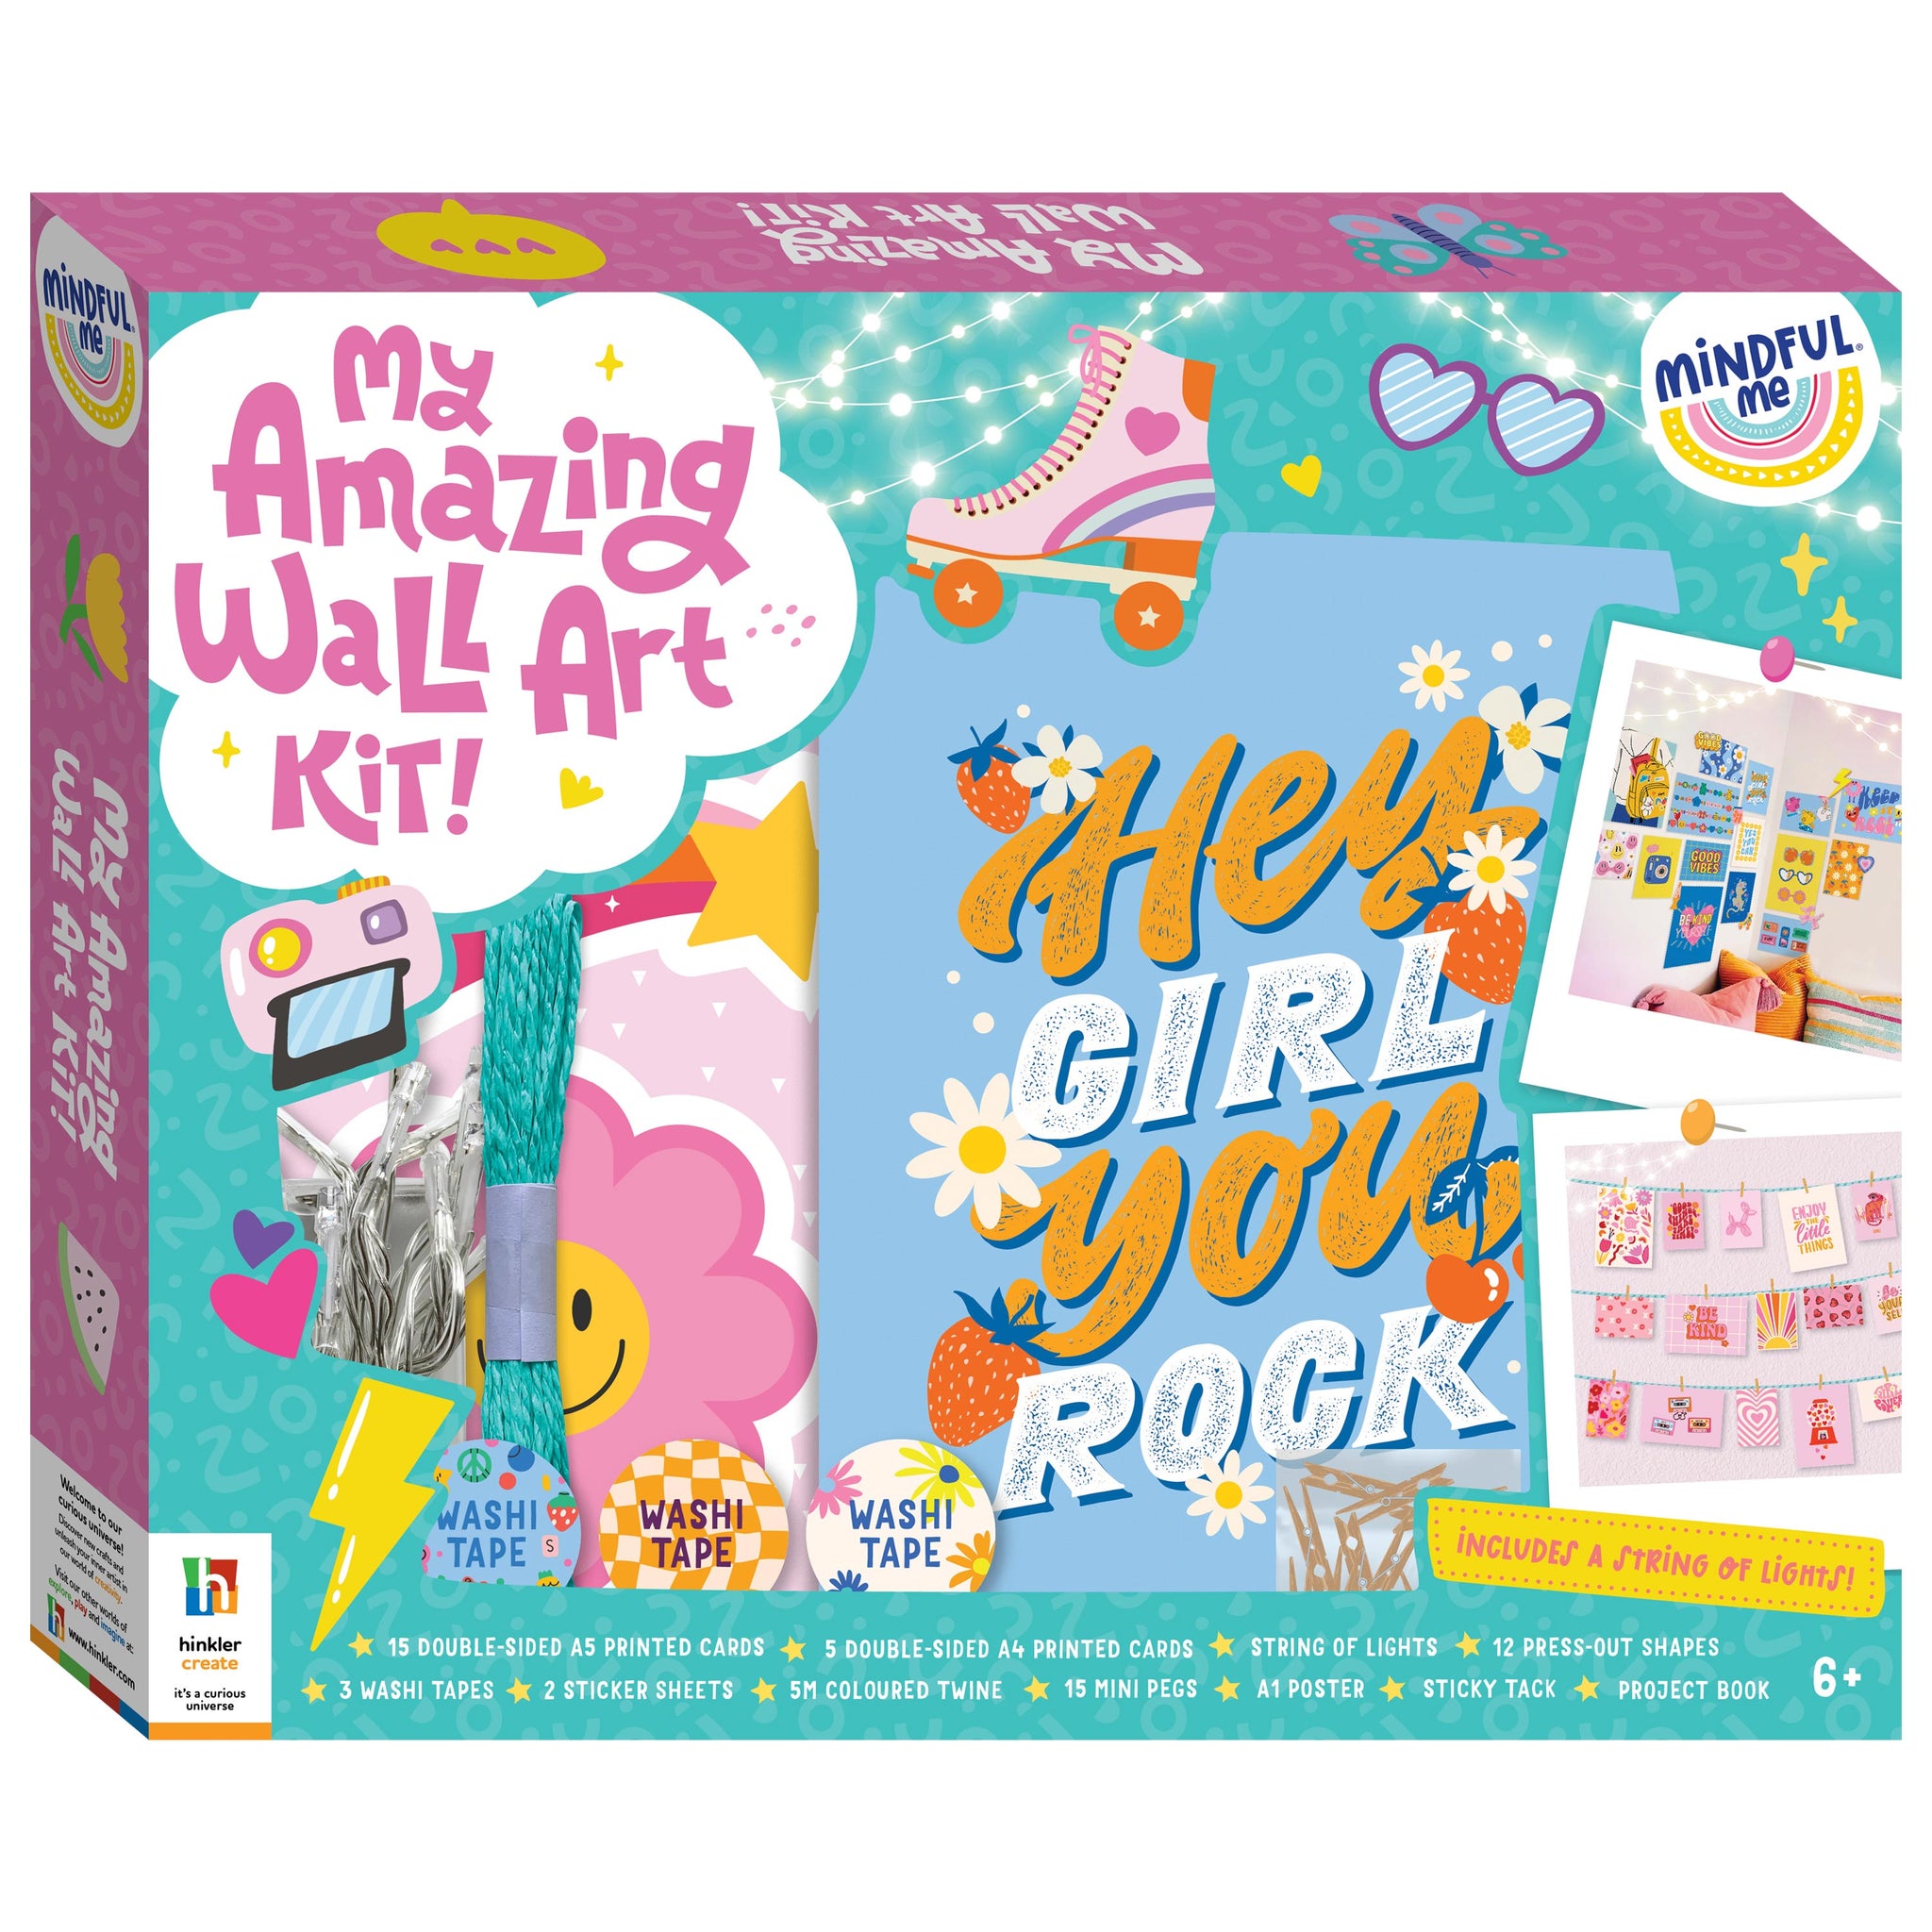 Mindful Me My Gallery Wall Art Kit